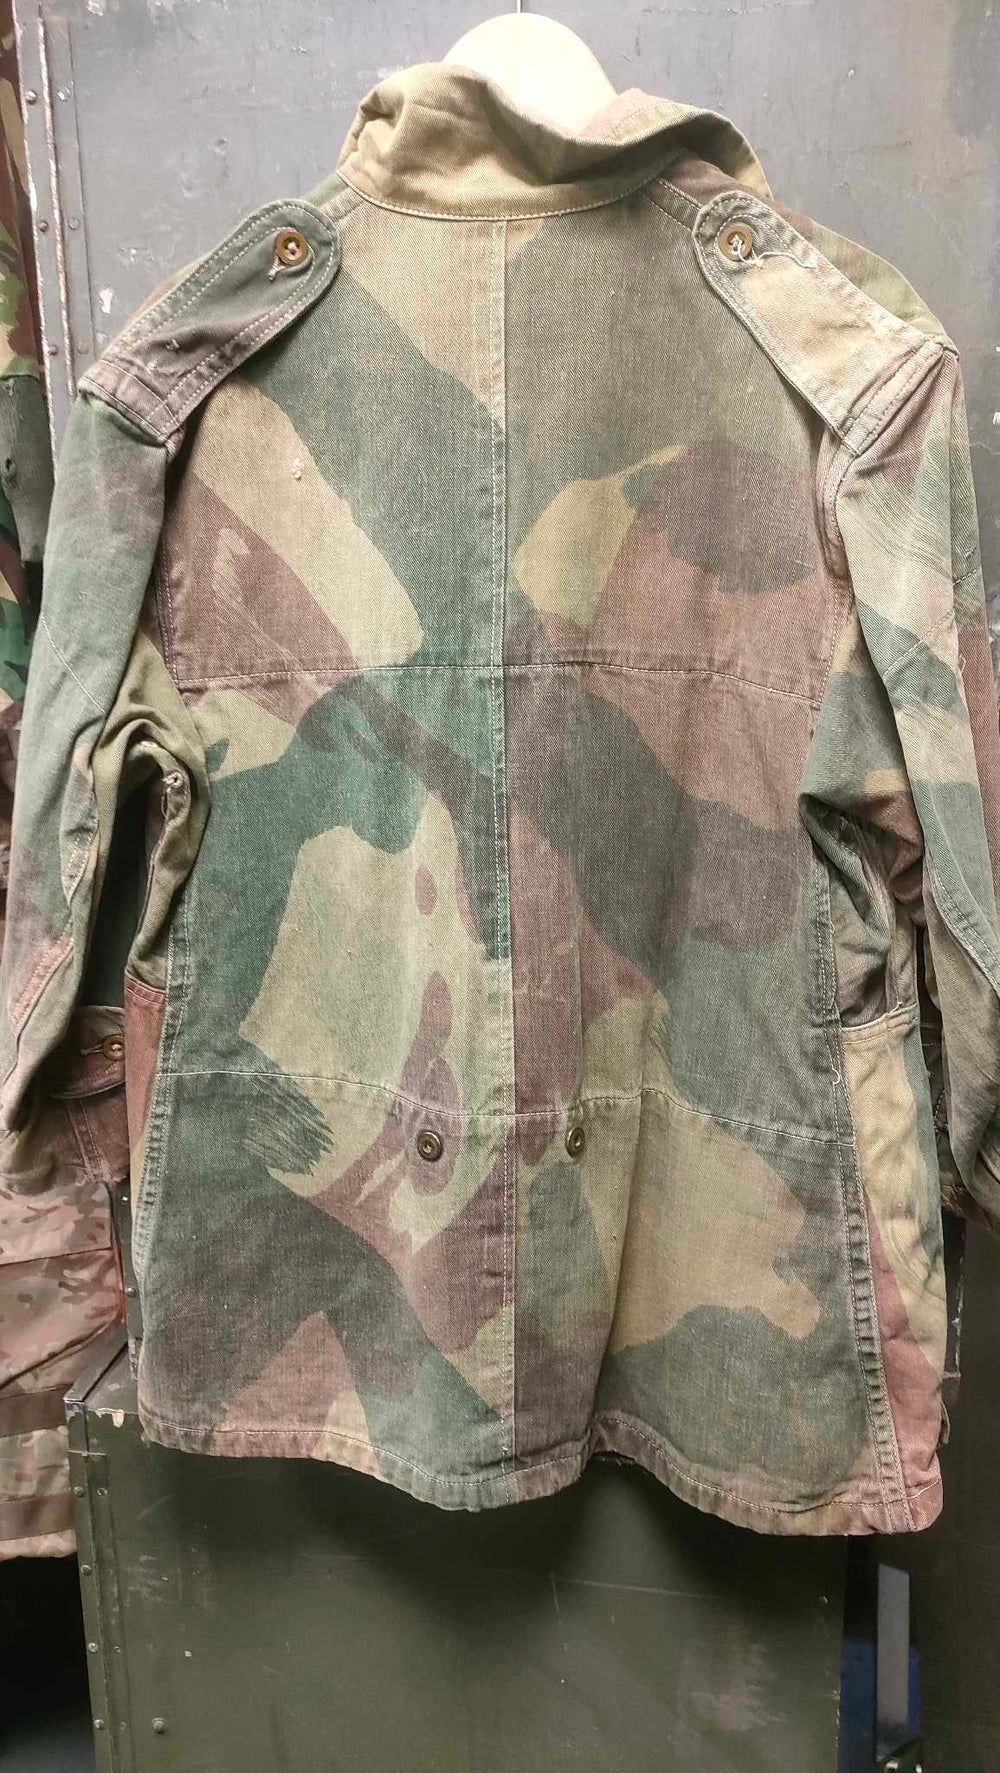 back view of camo print smock style jacket